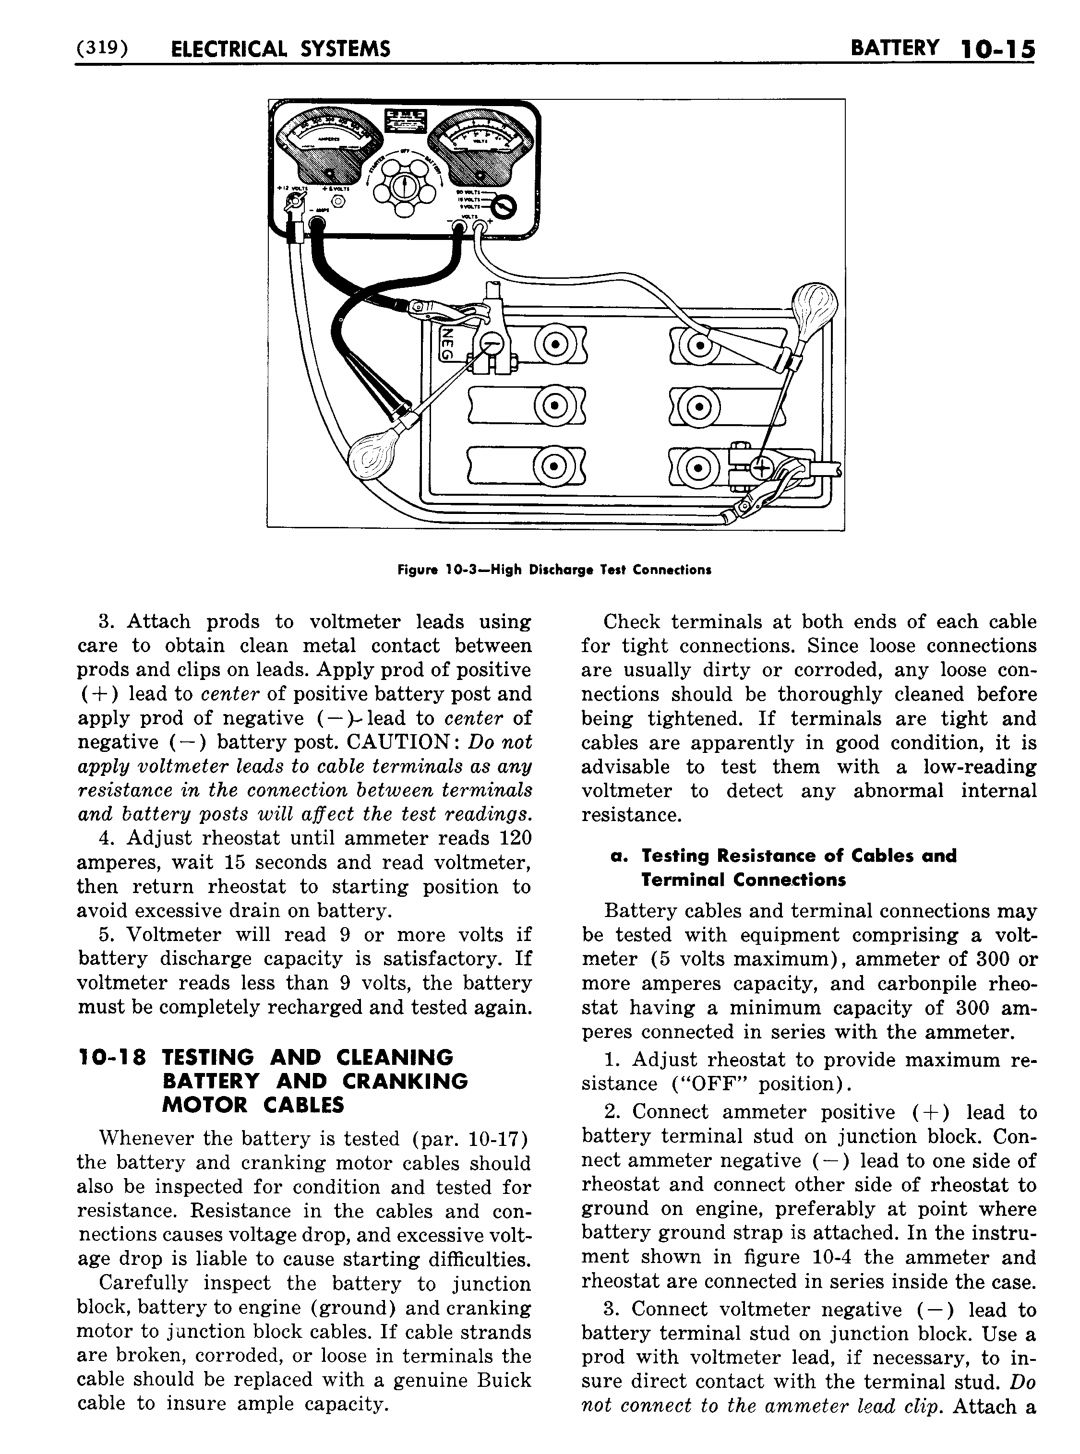 n_11 1955 Buick Shop Manual - Electrical Systems-015-015.jpg